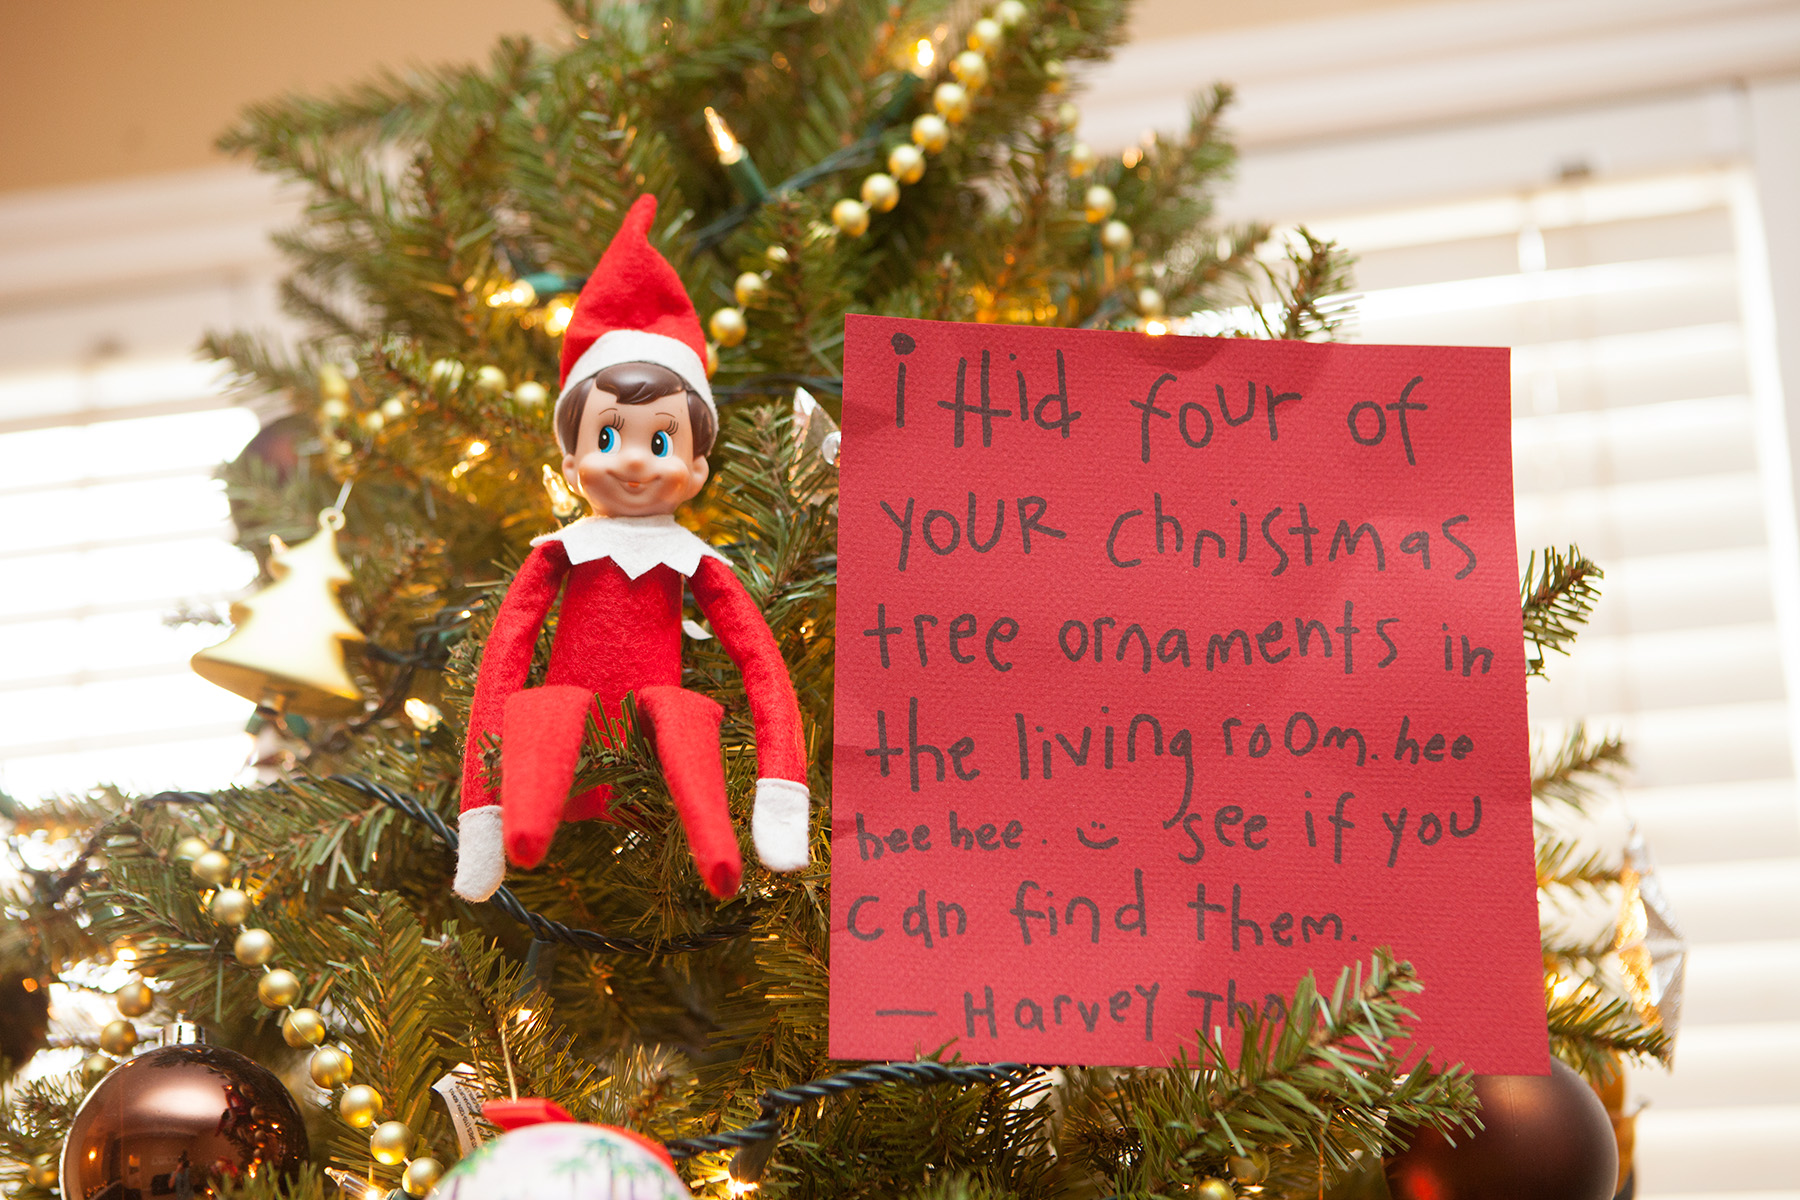 Elf sends the kids on a scavenger hunt for Christmas tree ornaments.